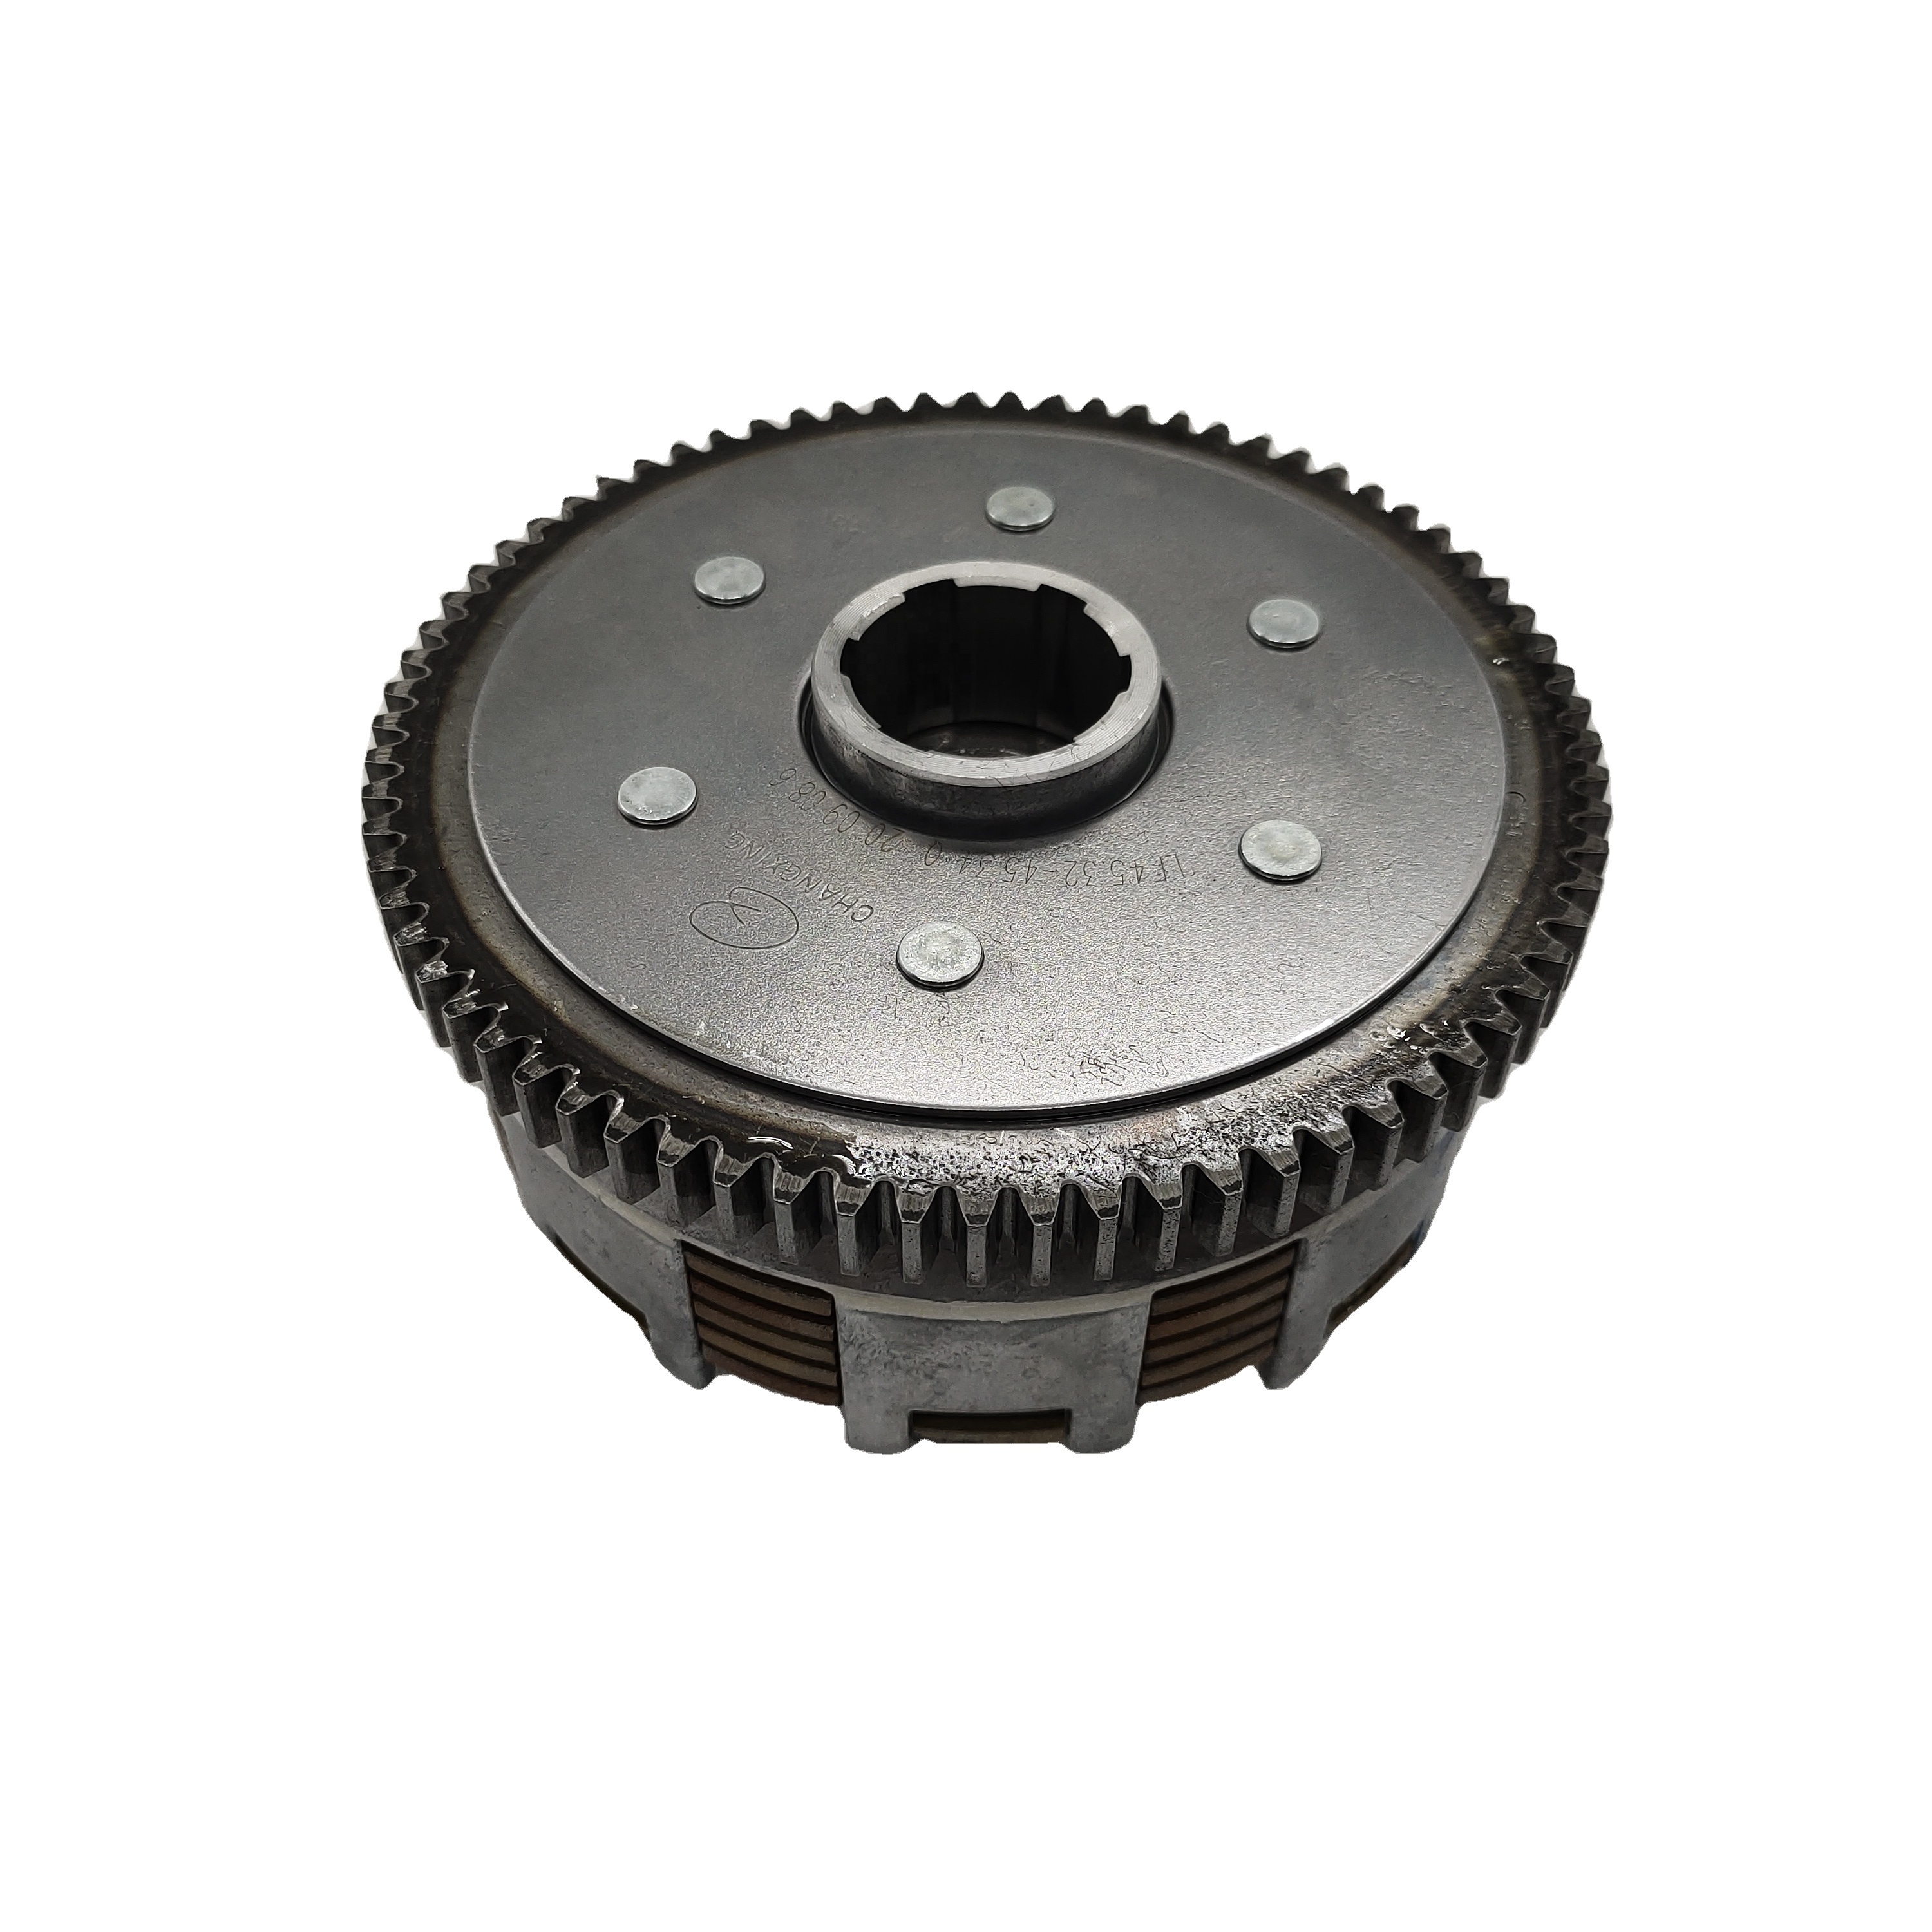 DAYANG  Motorcycle Engine  clutch with OEM quality,  tricycle spare part accessories clutch